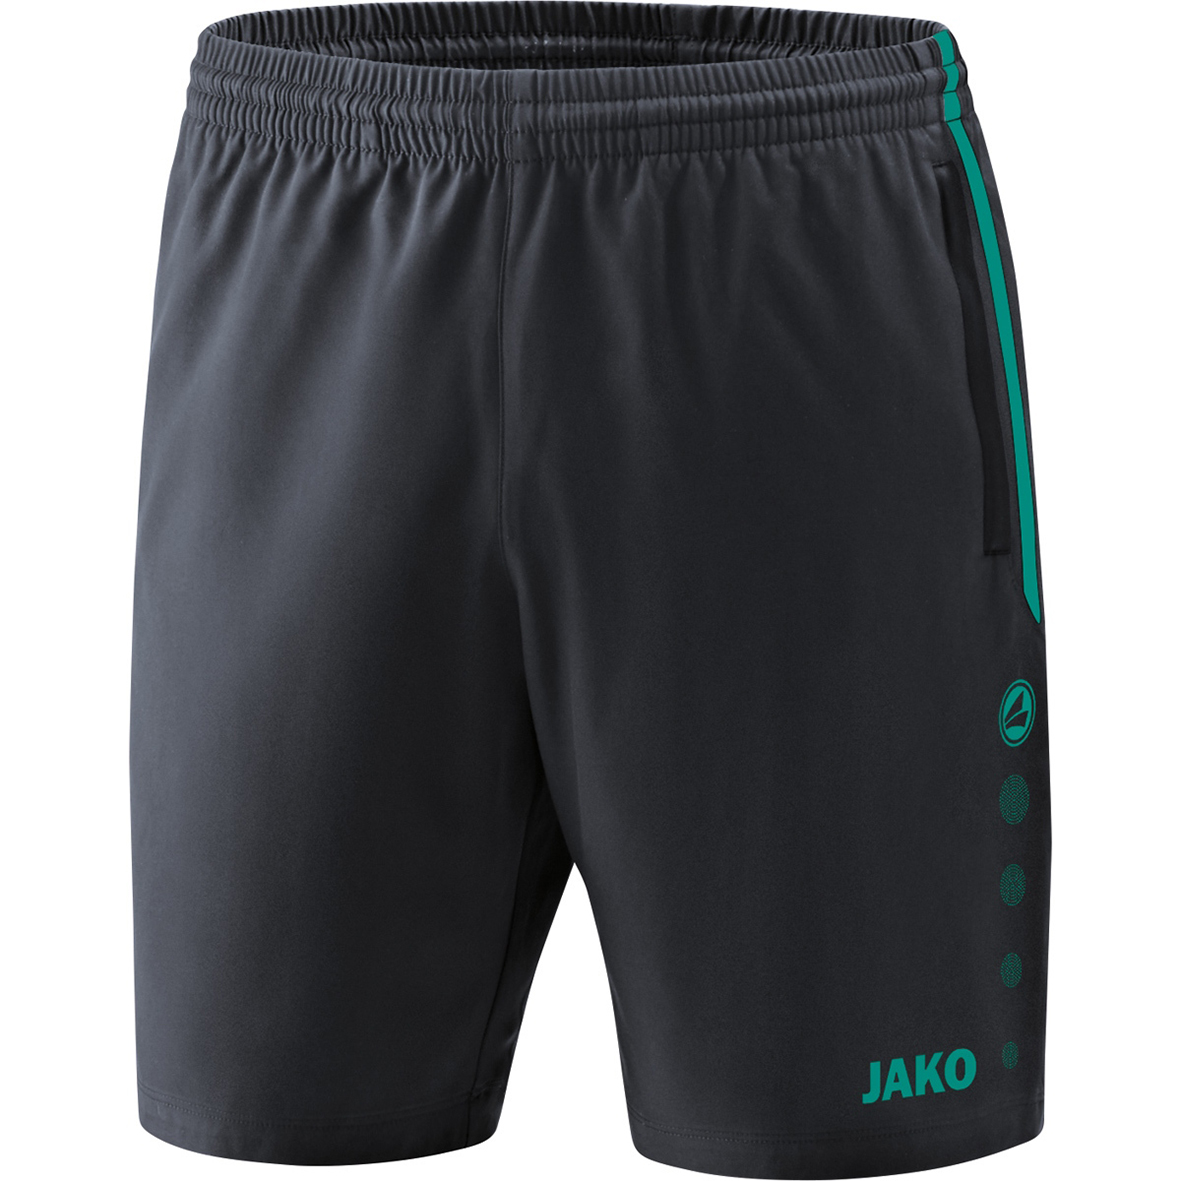 SHORTS JAKO COMPETITION 2.0, ANTHRACITE-TURQUOISE MEN.